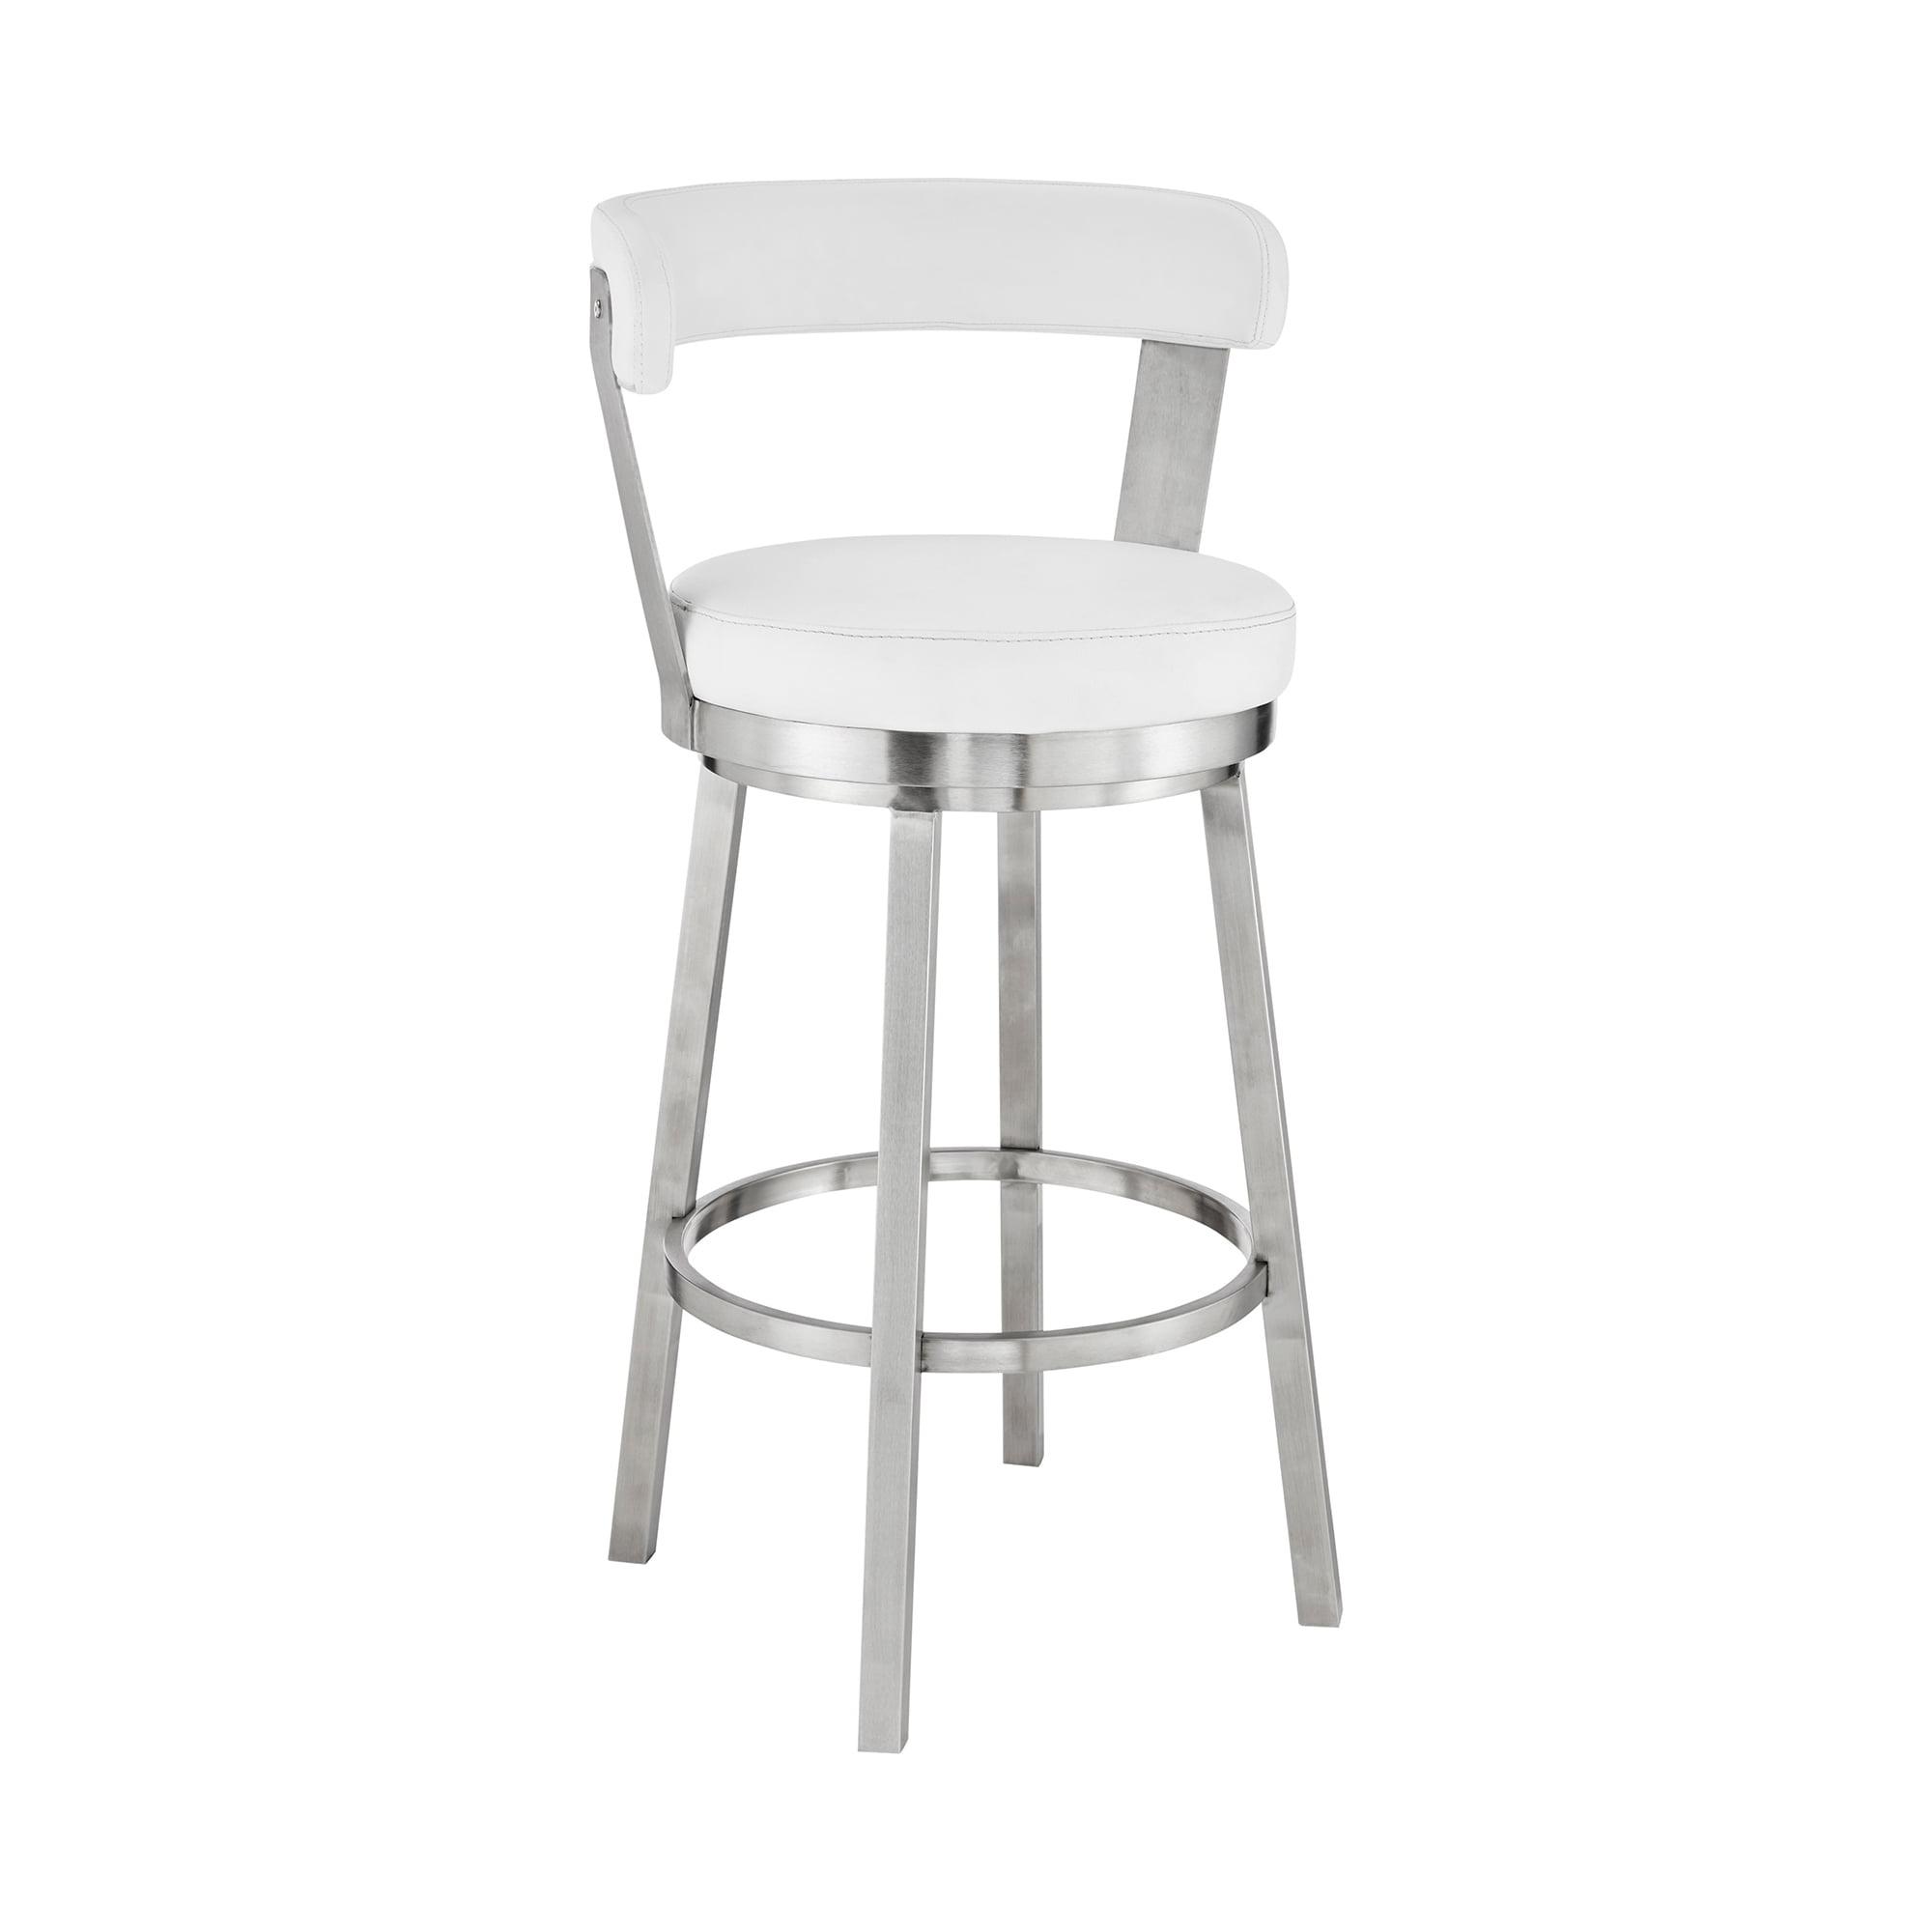 Modern White Leather Swivel Bar Stool with Stainless Steel Base